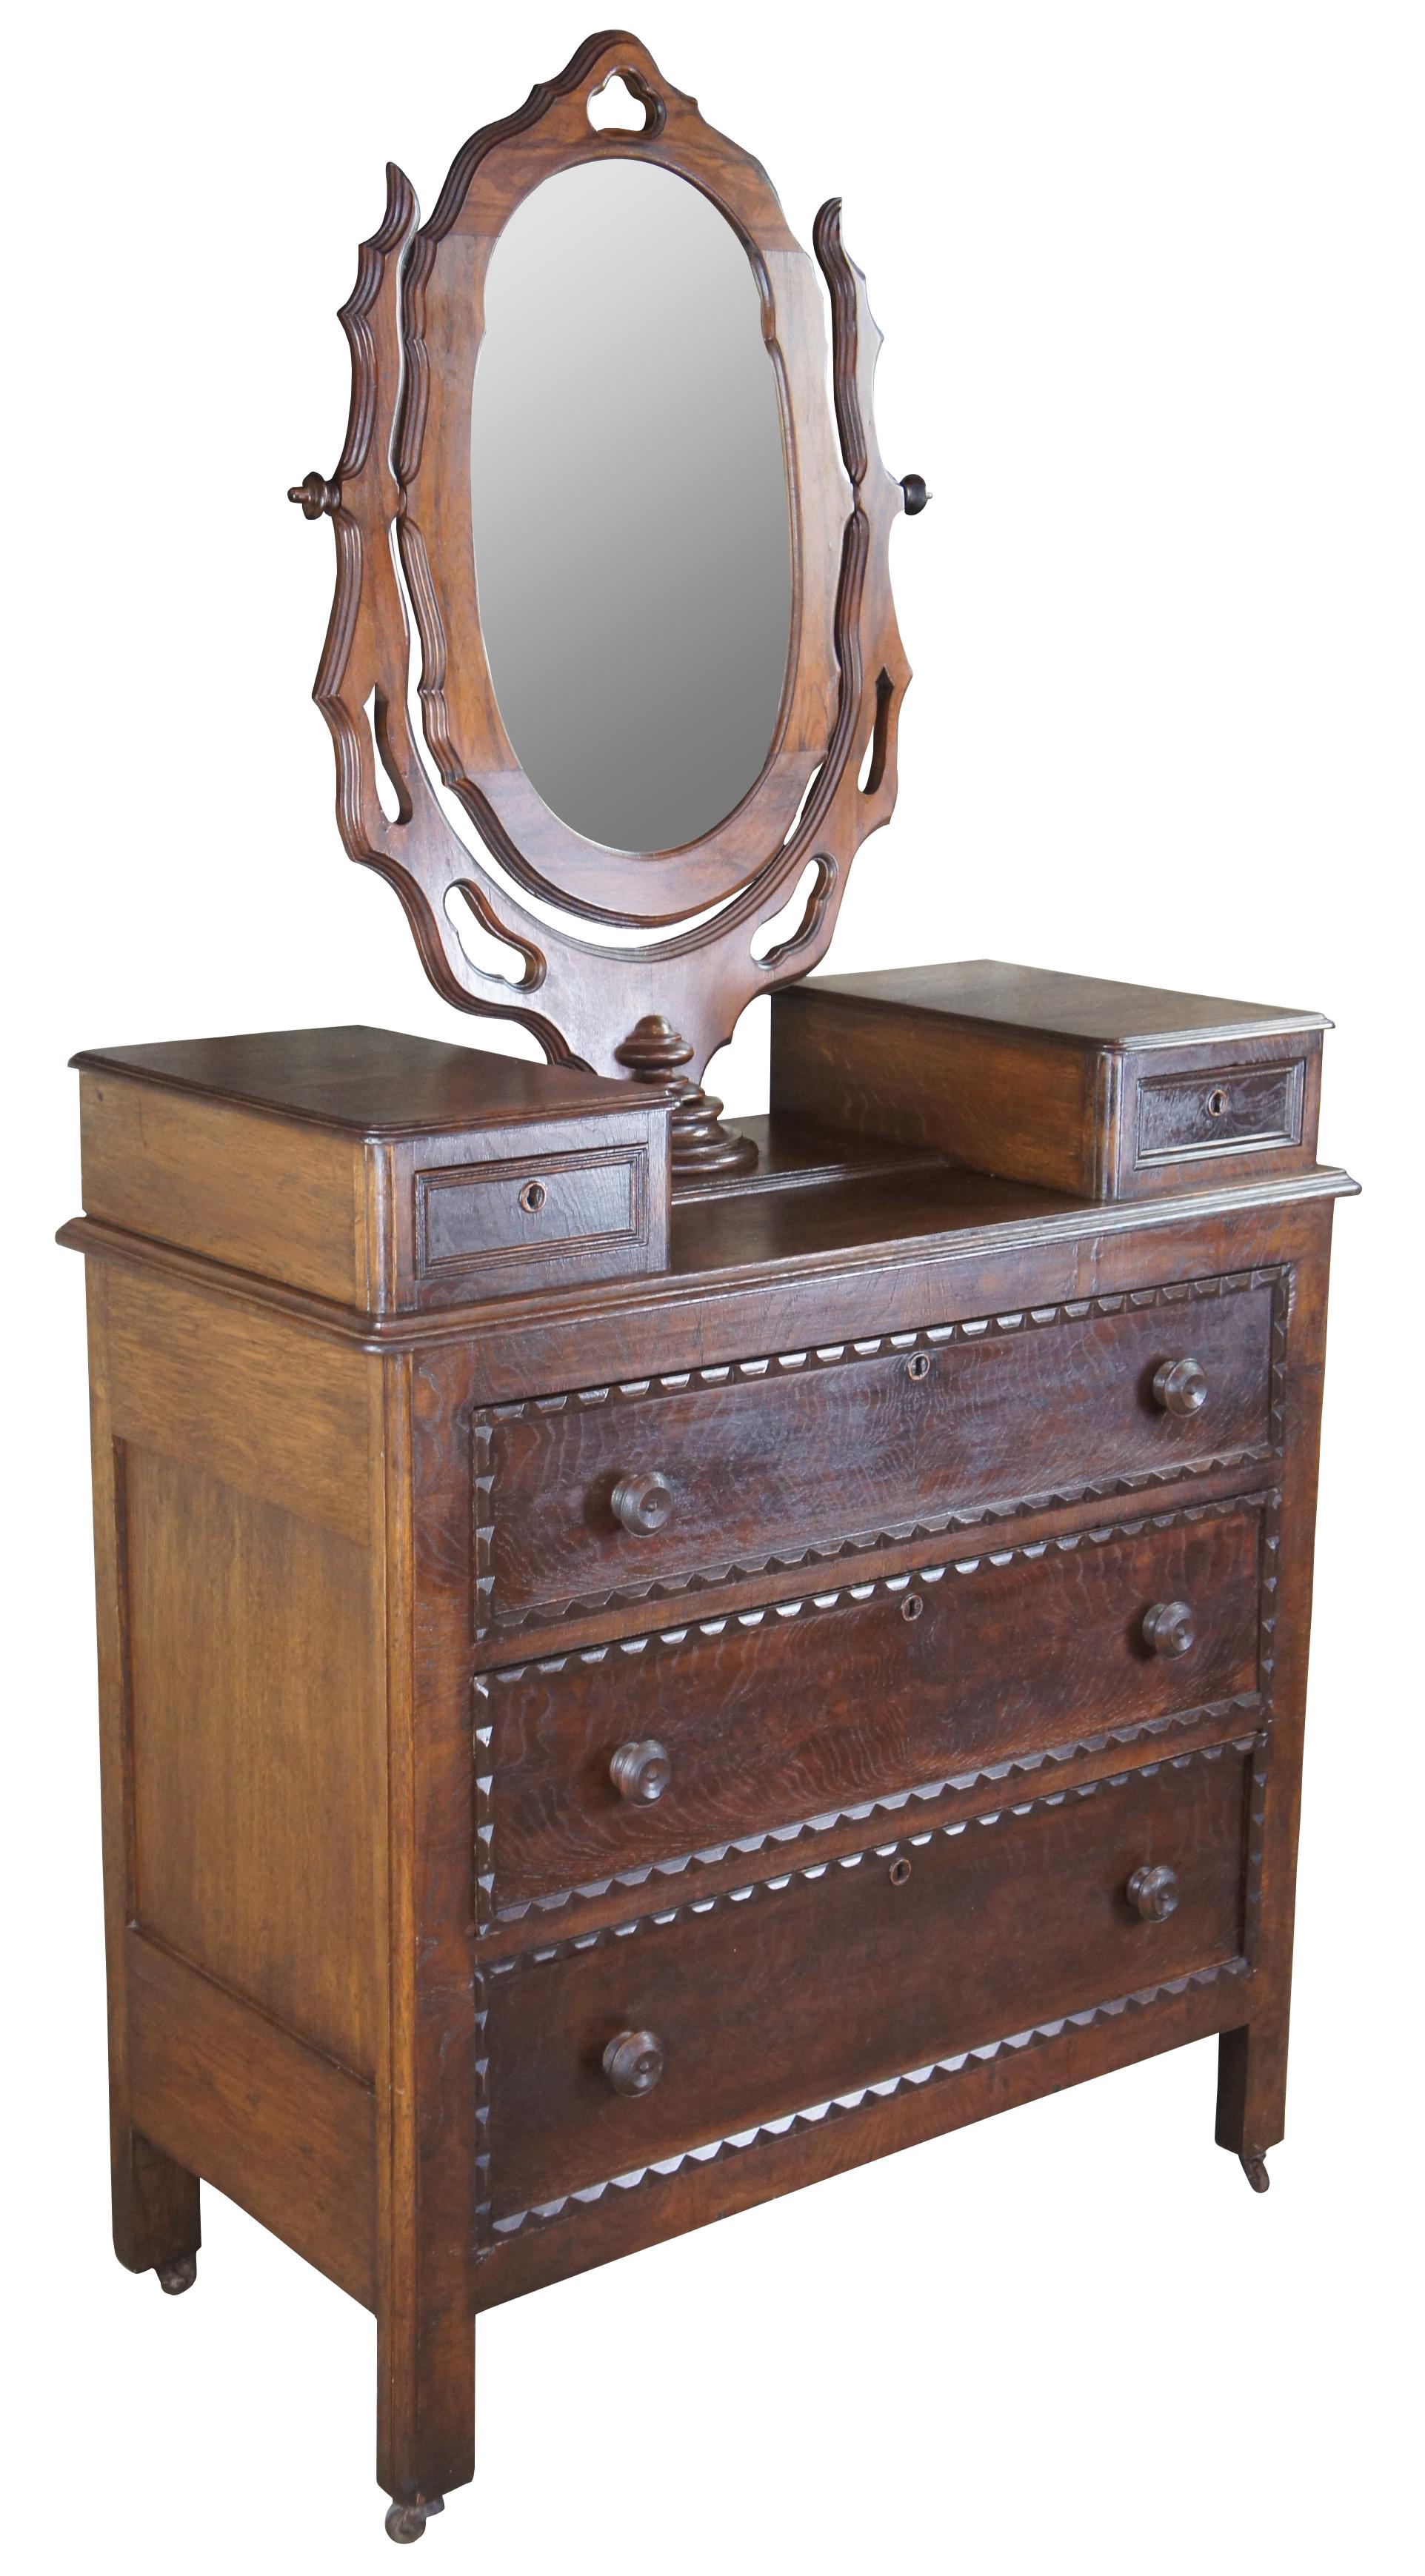 Antique Victorian mirror top dresser, circa 1880s. Made of walnut featuring ornate styling with carved ornate swivel mirror, three full sized drawers and two upper glove box drawers.

Measures: 18.5